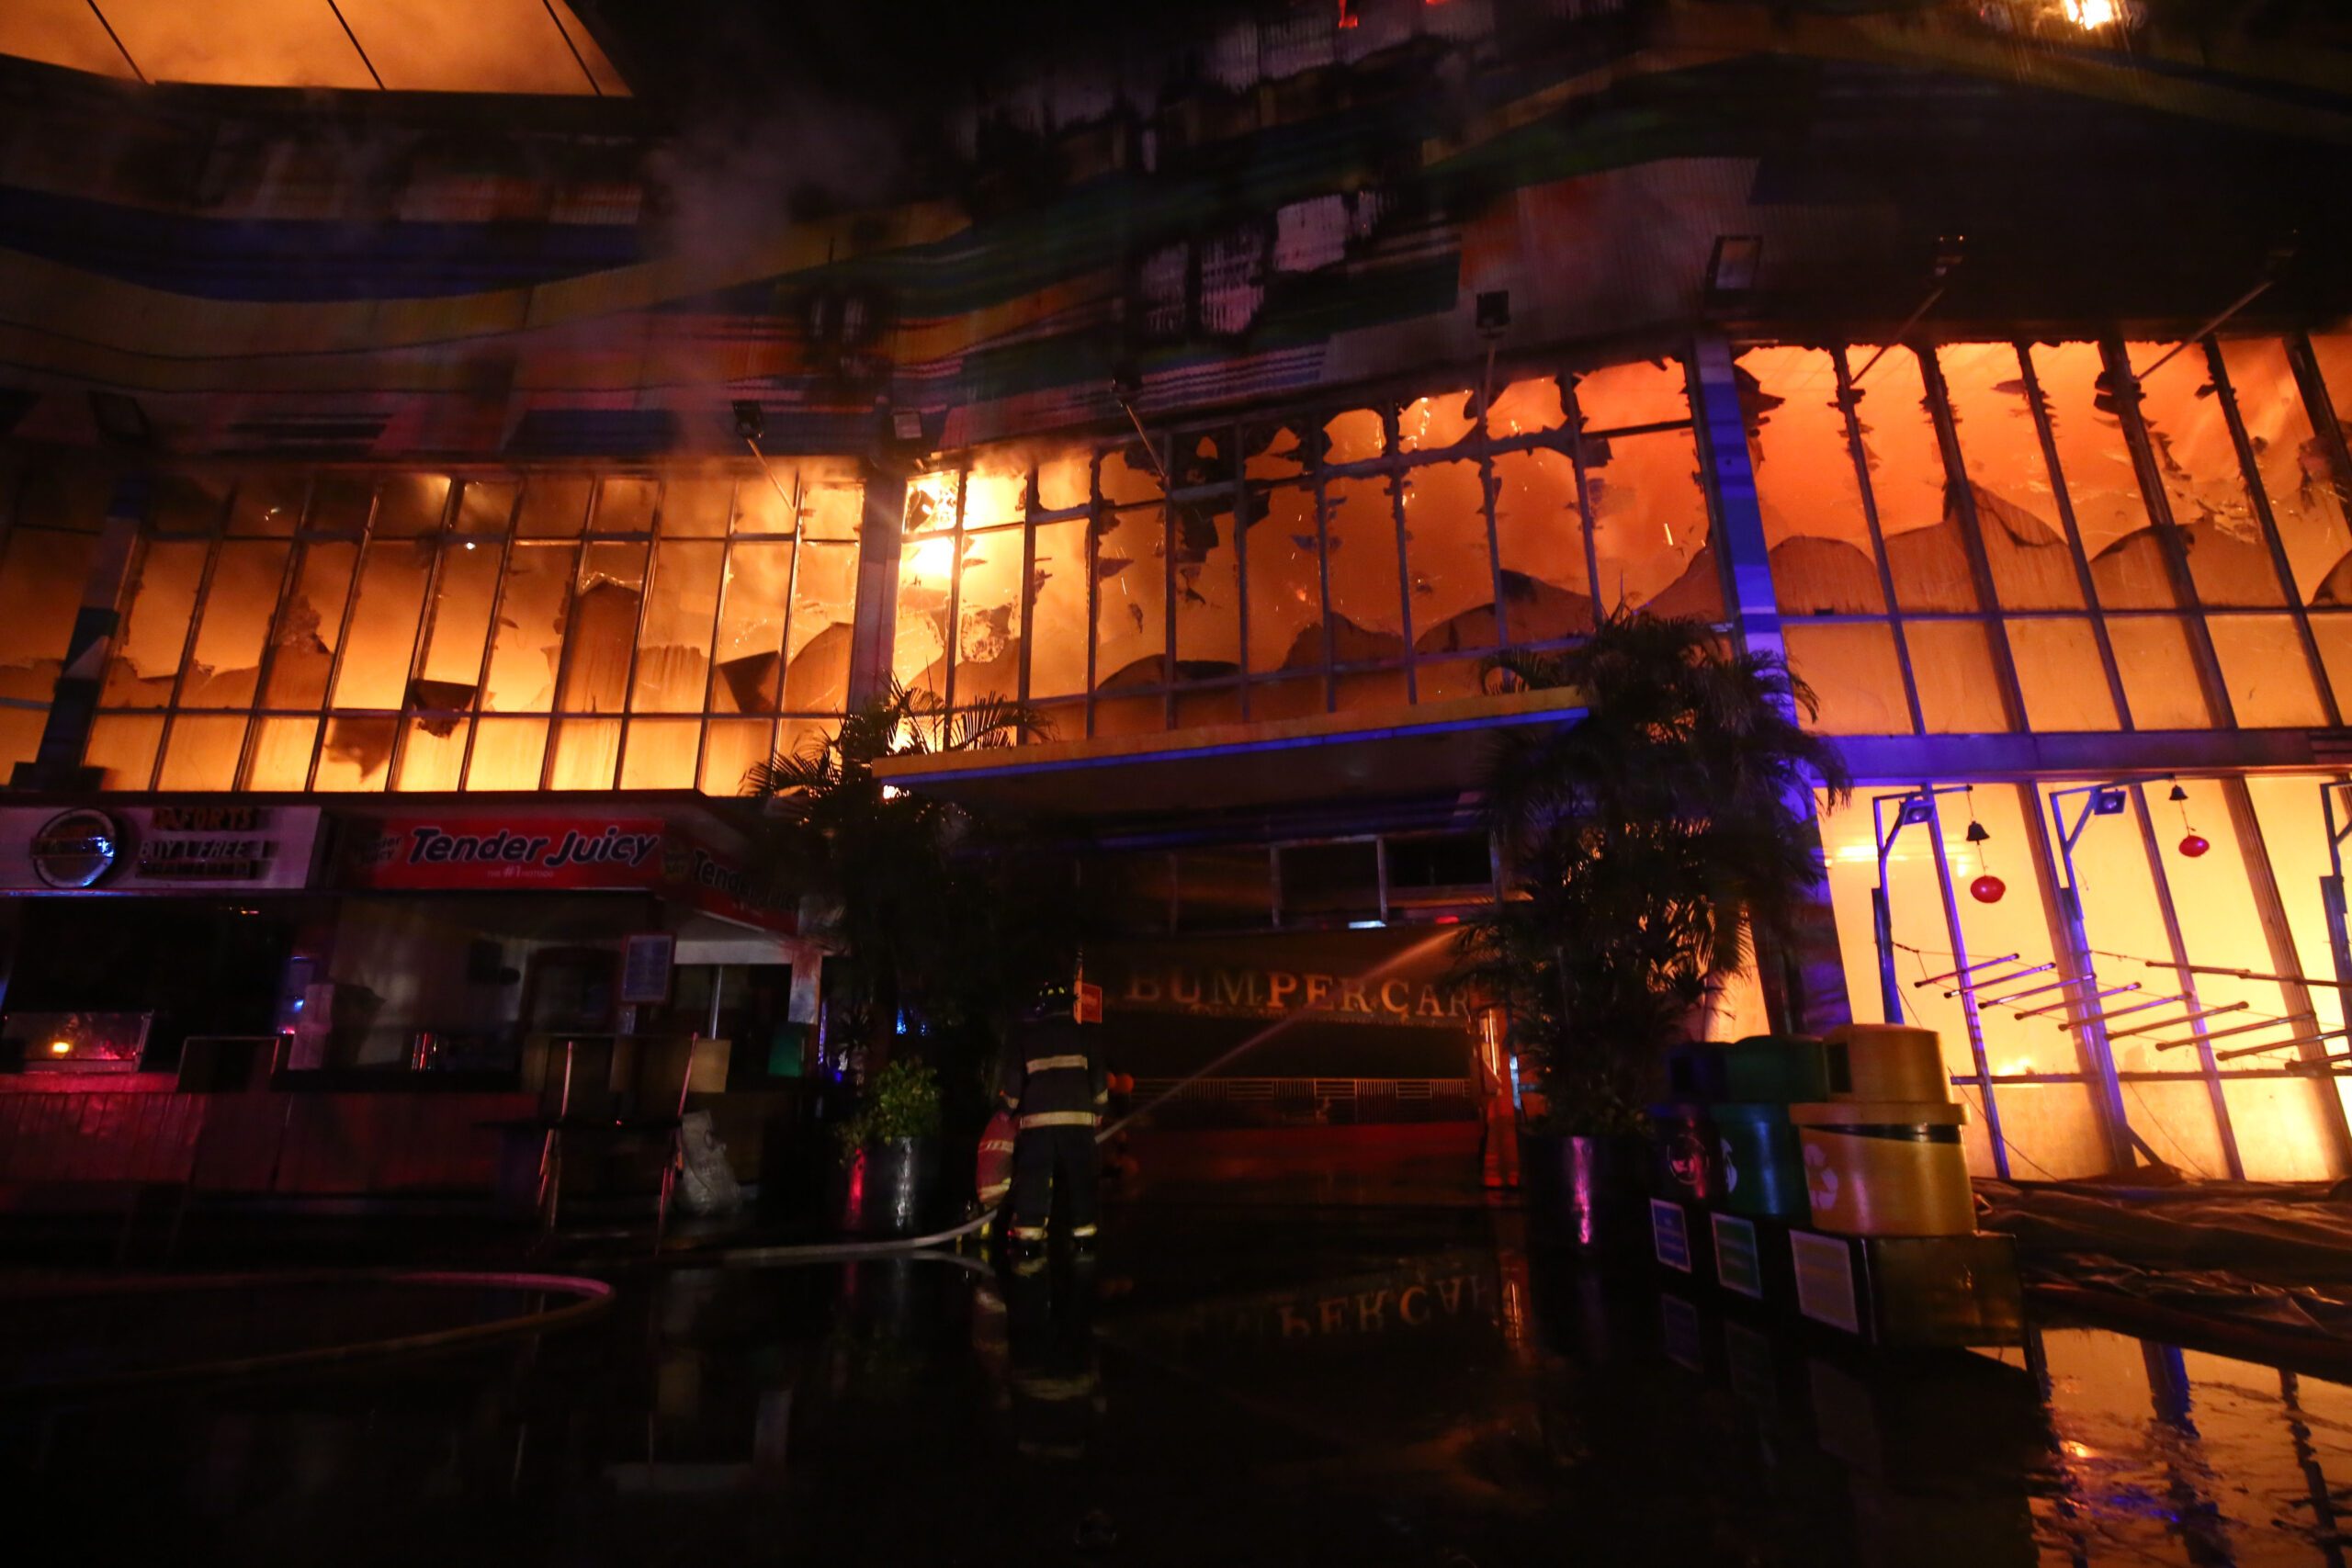 Char pattern hints arson as possible cause of Star City fire